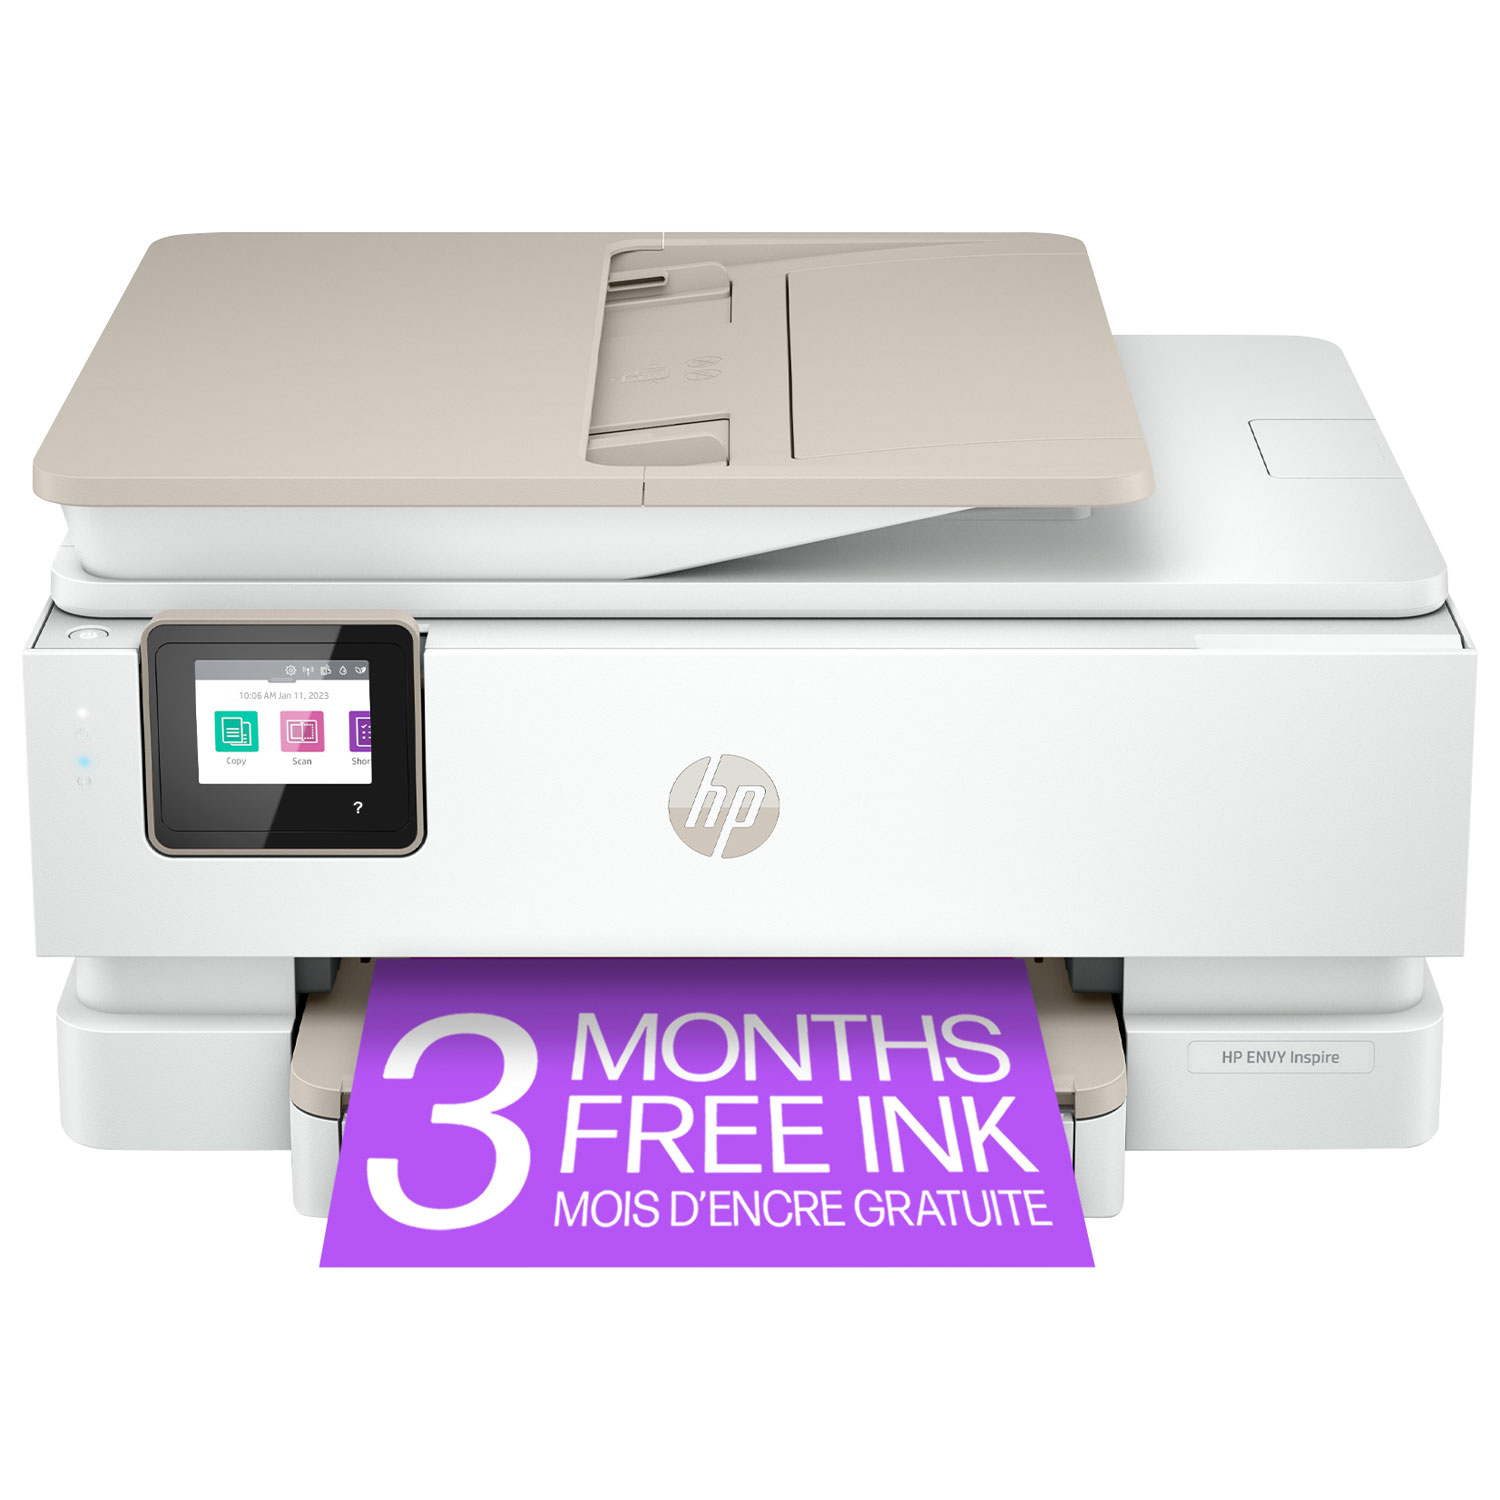 HP ENVY Inspire 7955e Wireless All-In-One Inkjet Printer - HP Instant Ink 3-Month Free Trial Included*